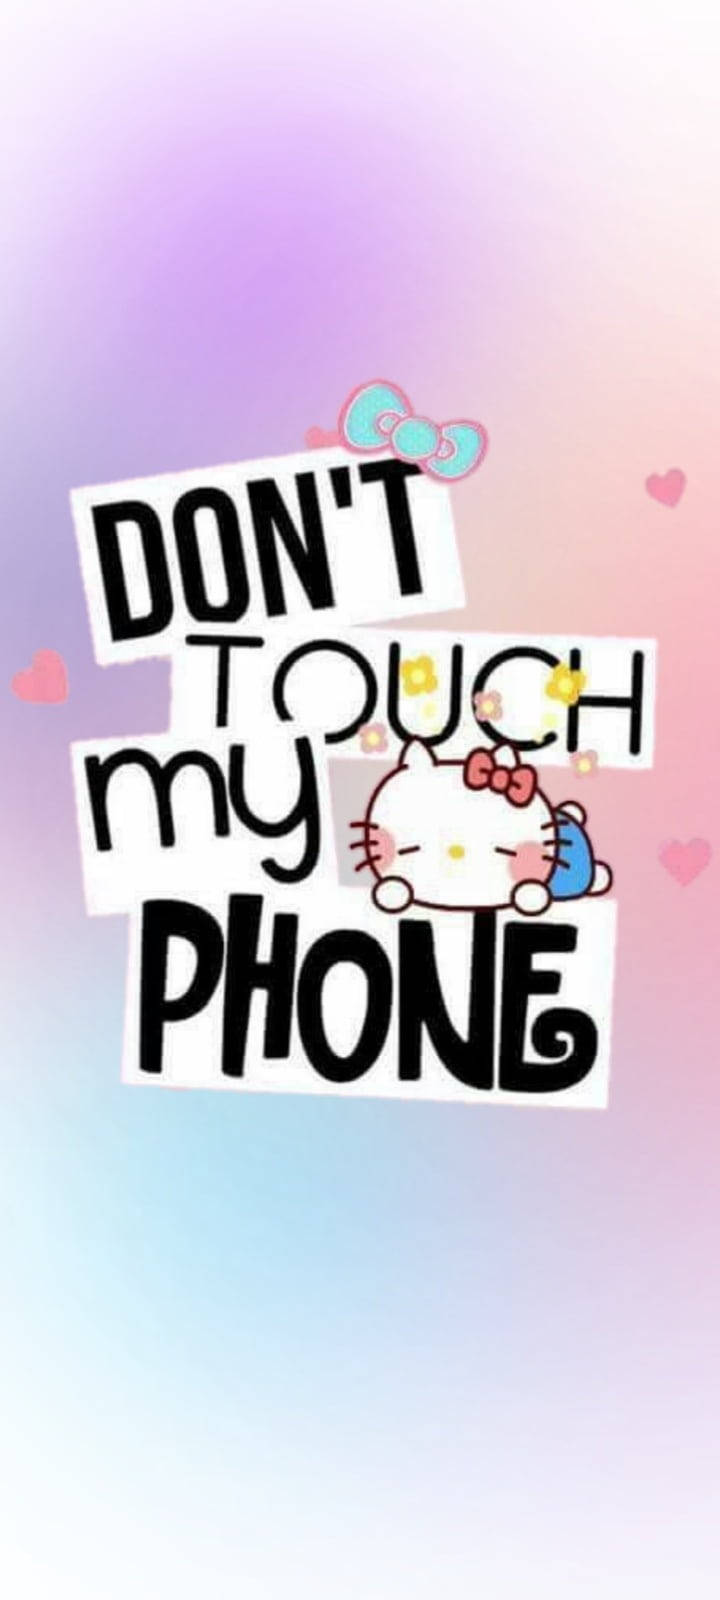 Download Don't Touch My Phone Tumblr Iphone Wallpaper | Wallpapers.com